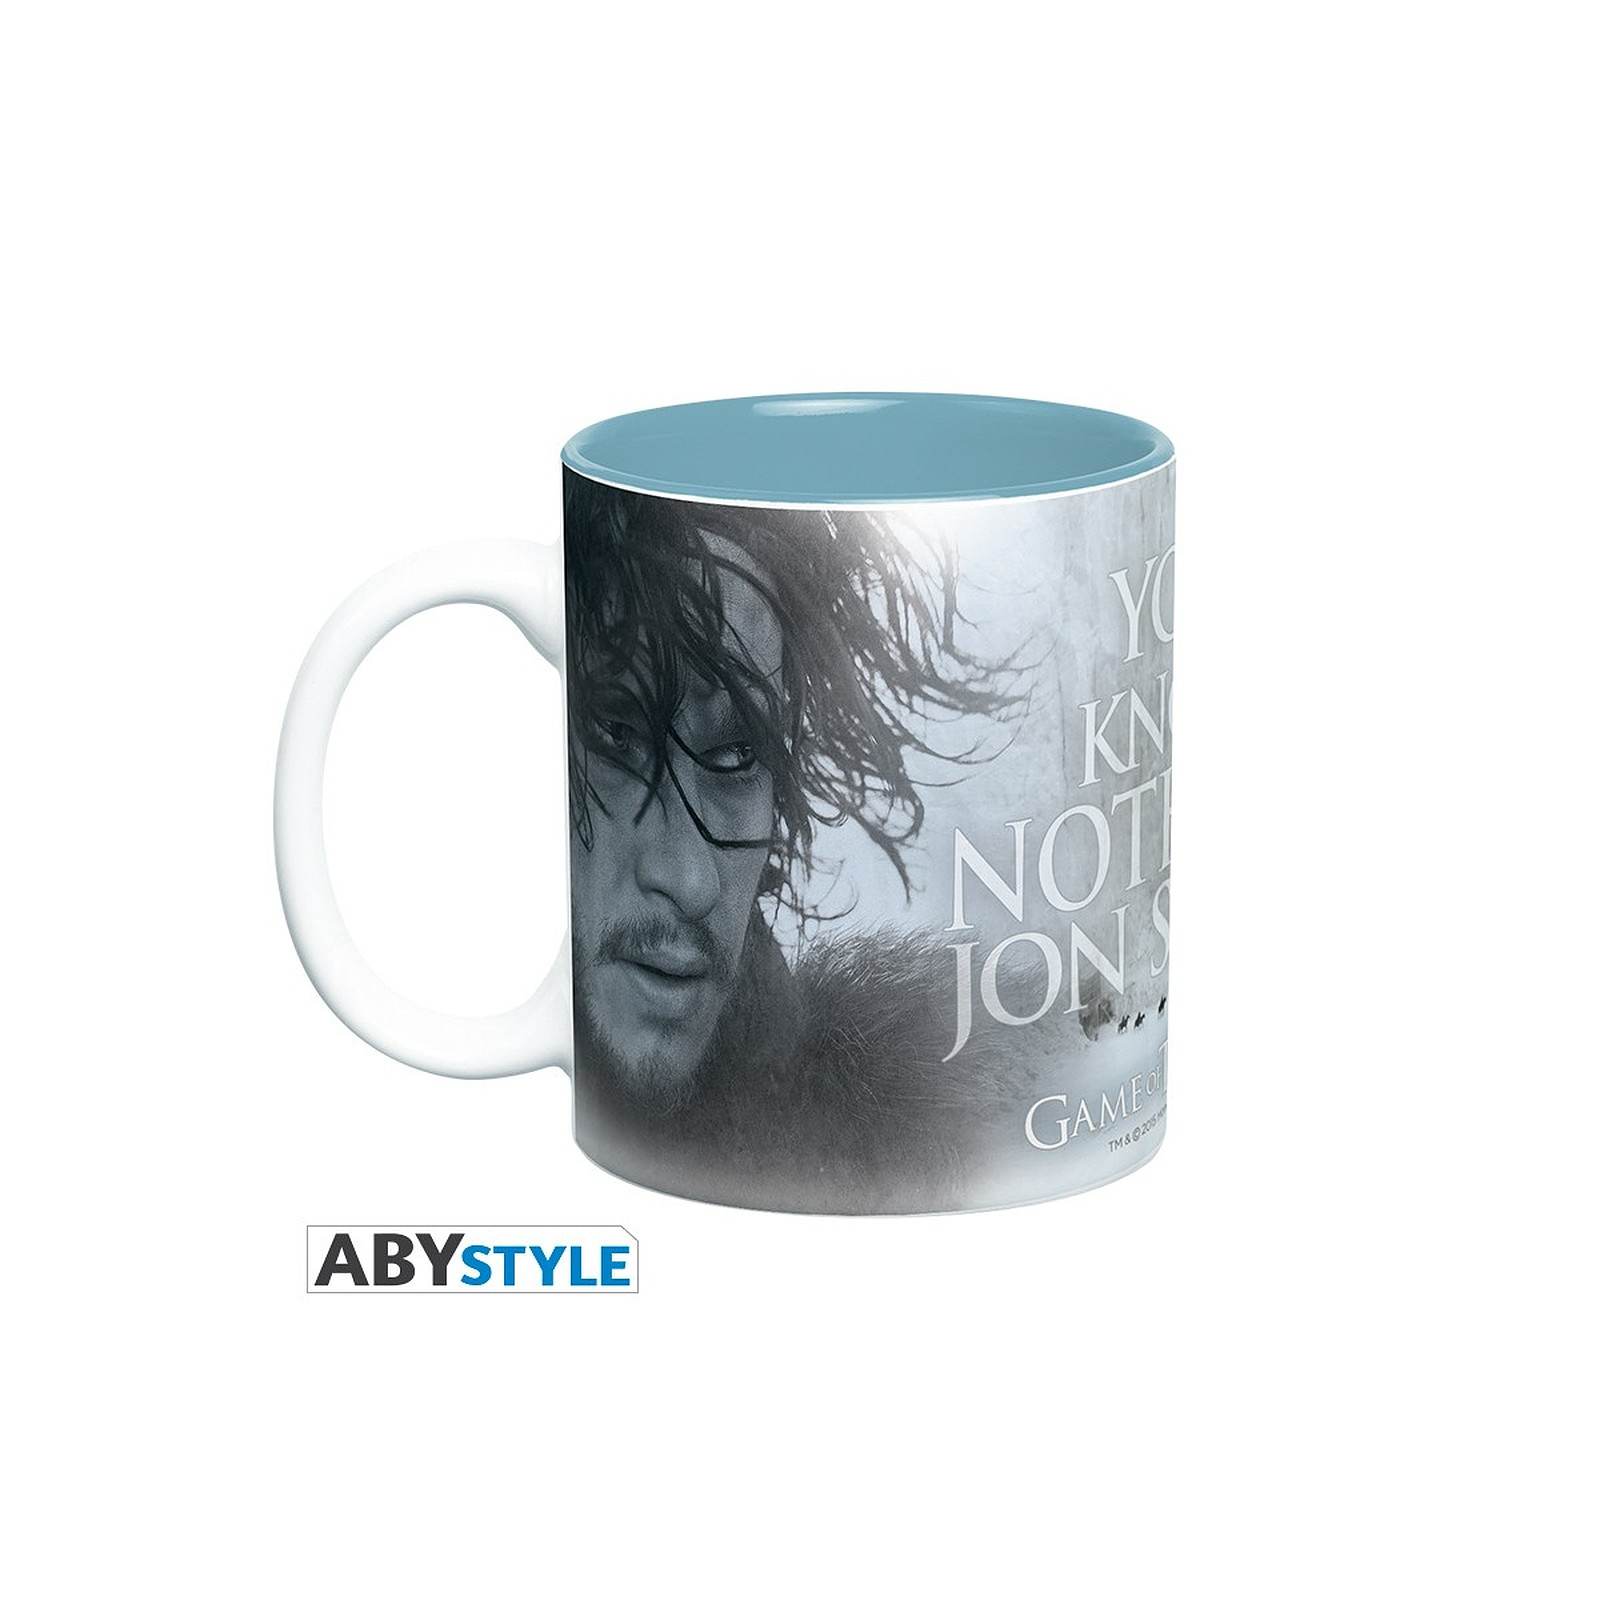 Game Of Thrones - Mug 460 ml - You Know Nothing - Mugs Abystyle